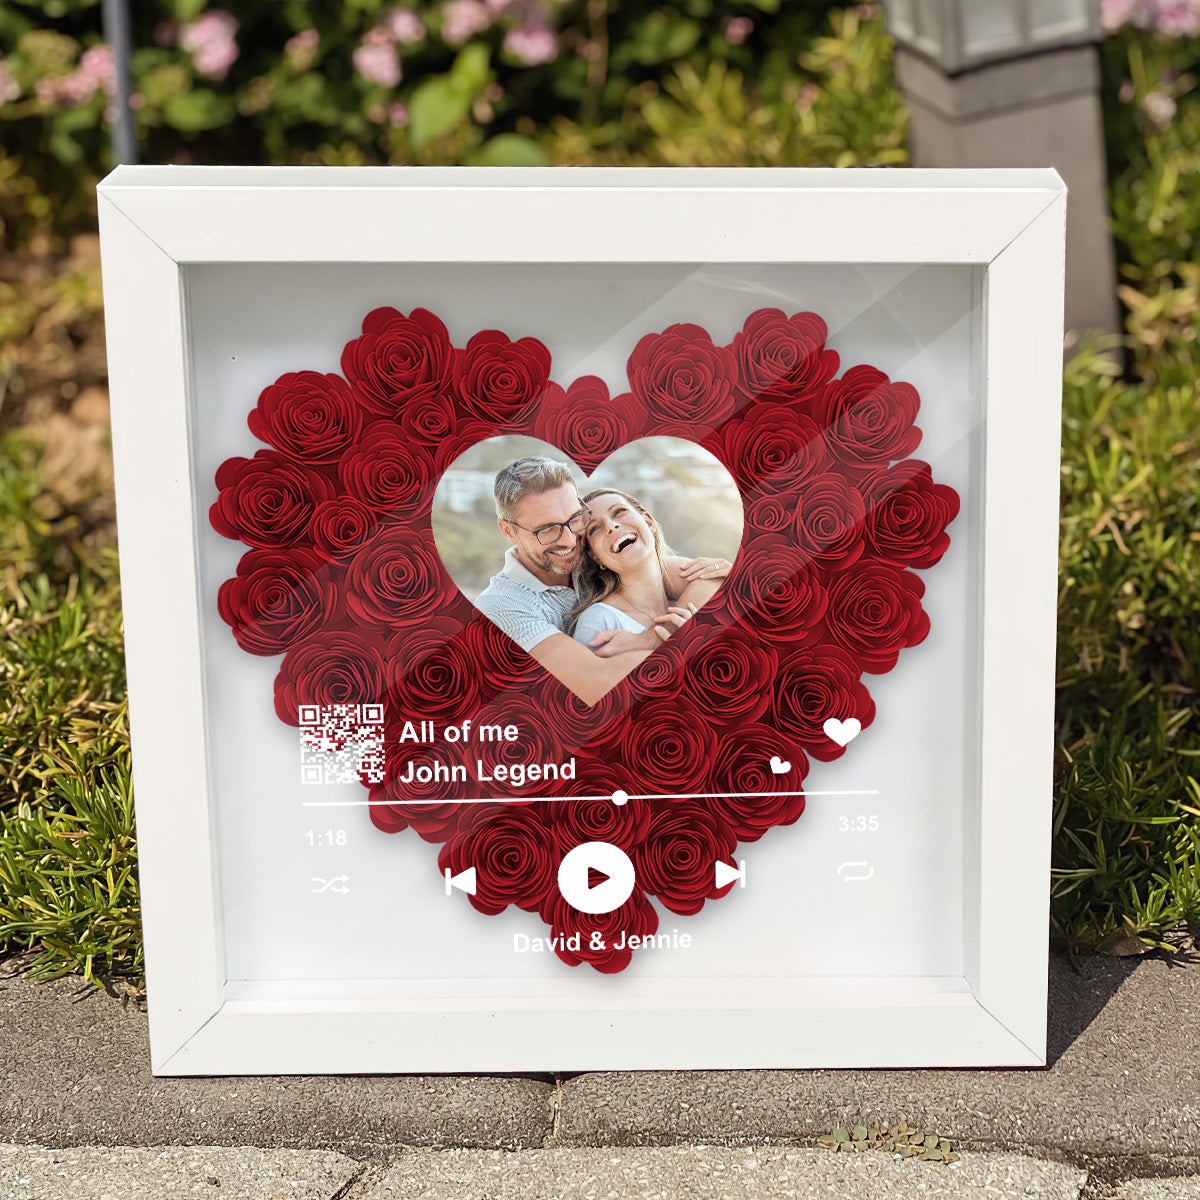 Discover Custom Photo Scannable QR Code Favorite Song - Personalized Couple Flower Frame Box